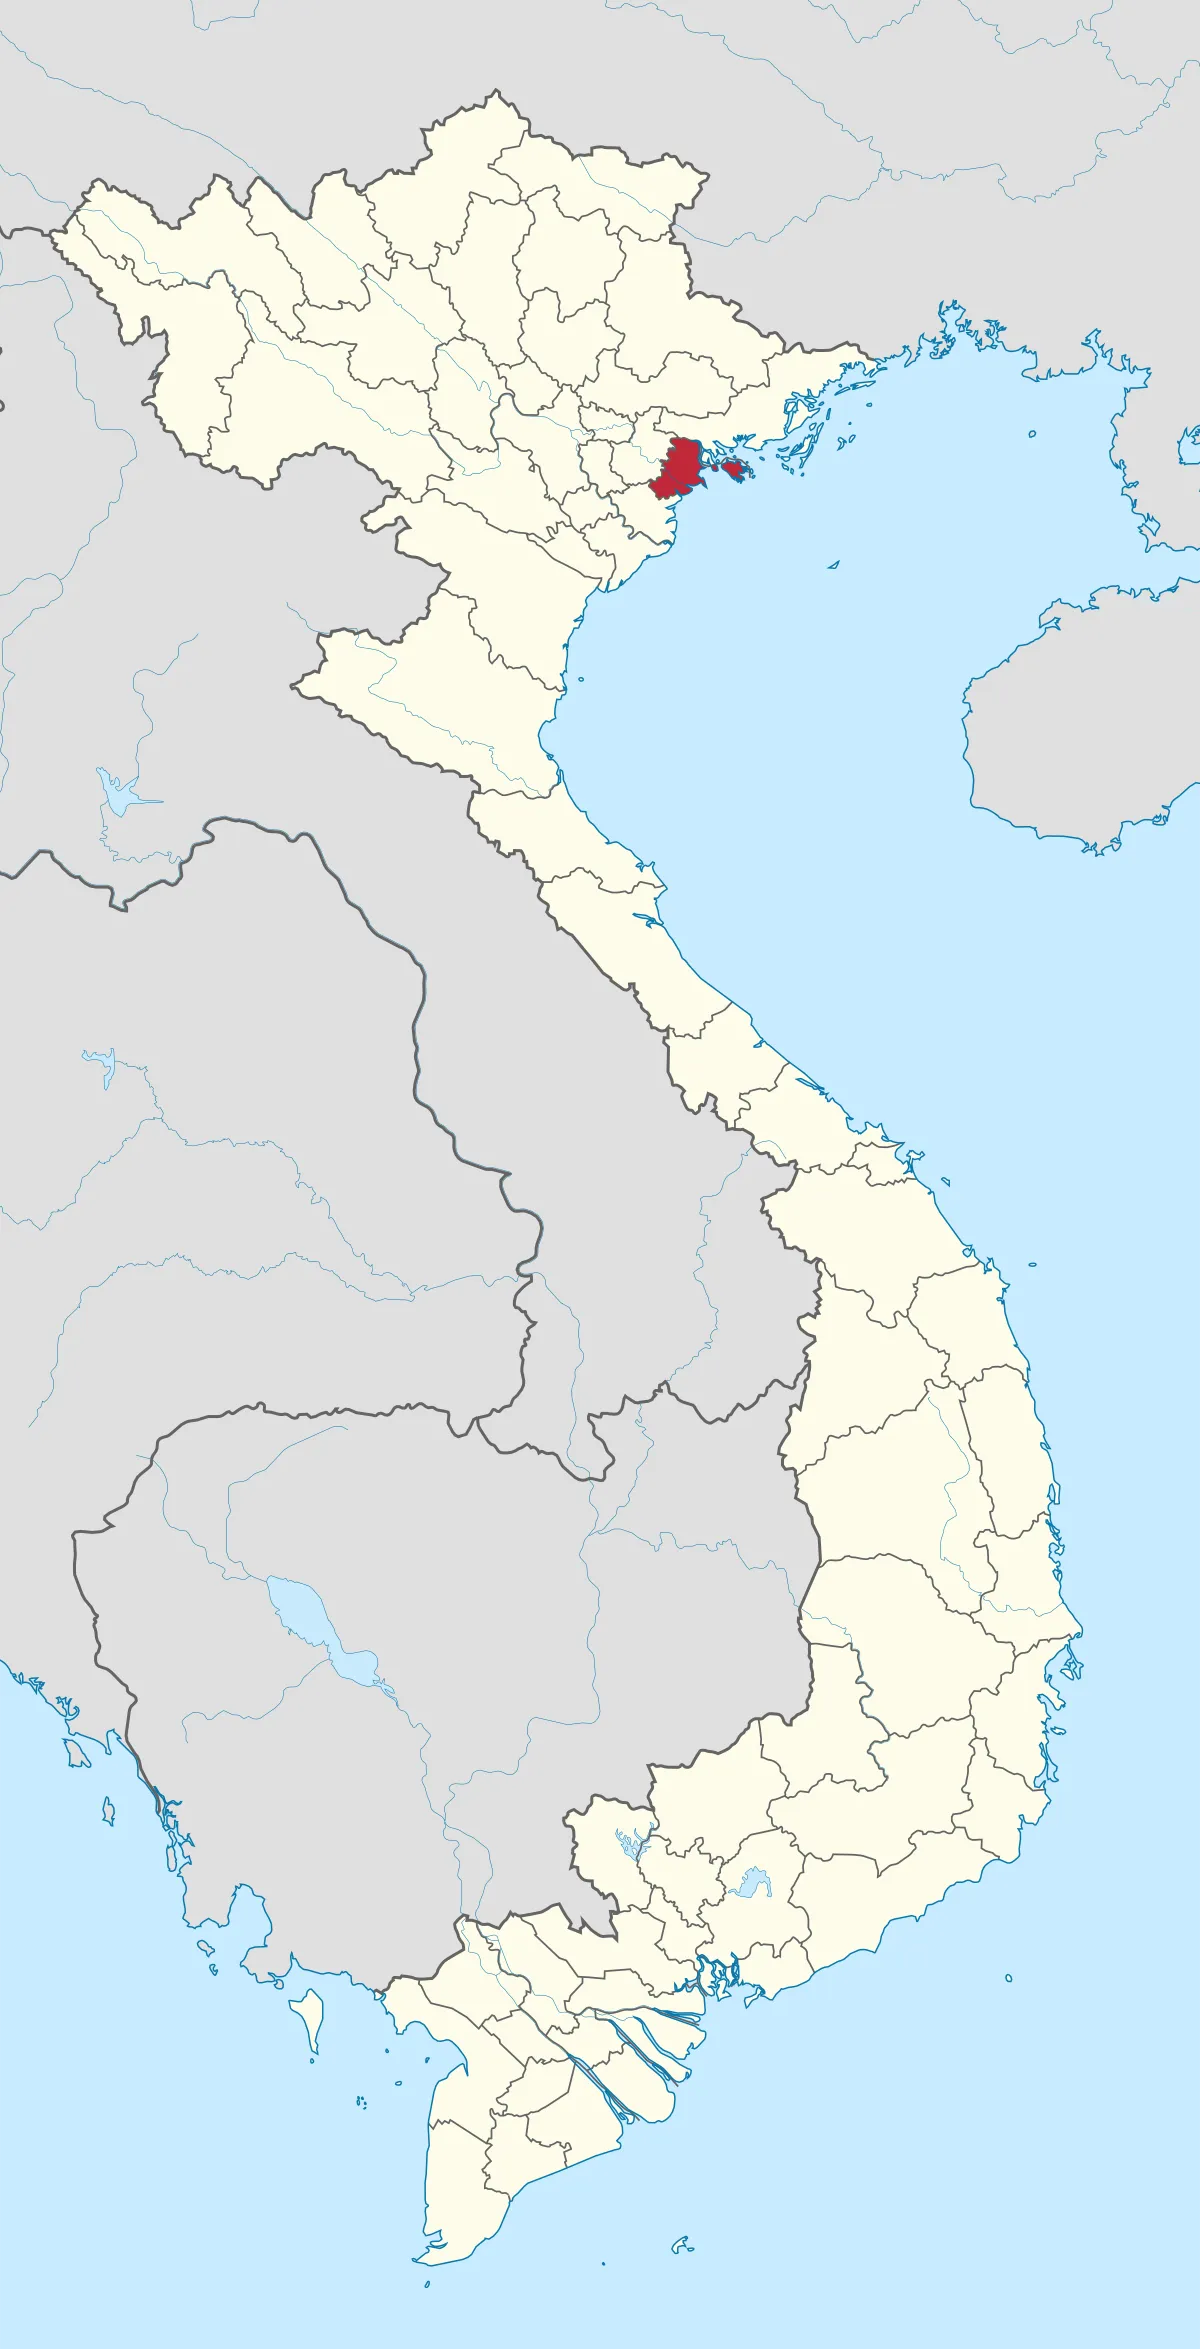 Location of province Hai Phong in Vietnam - image